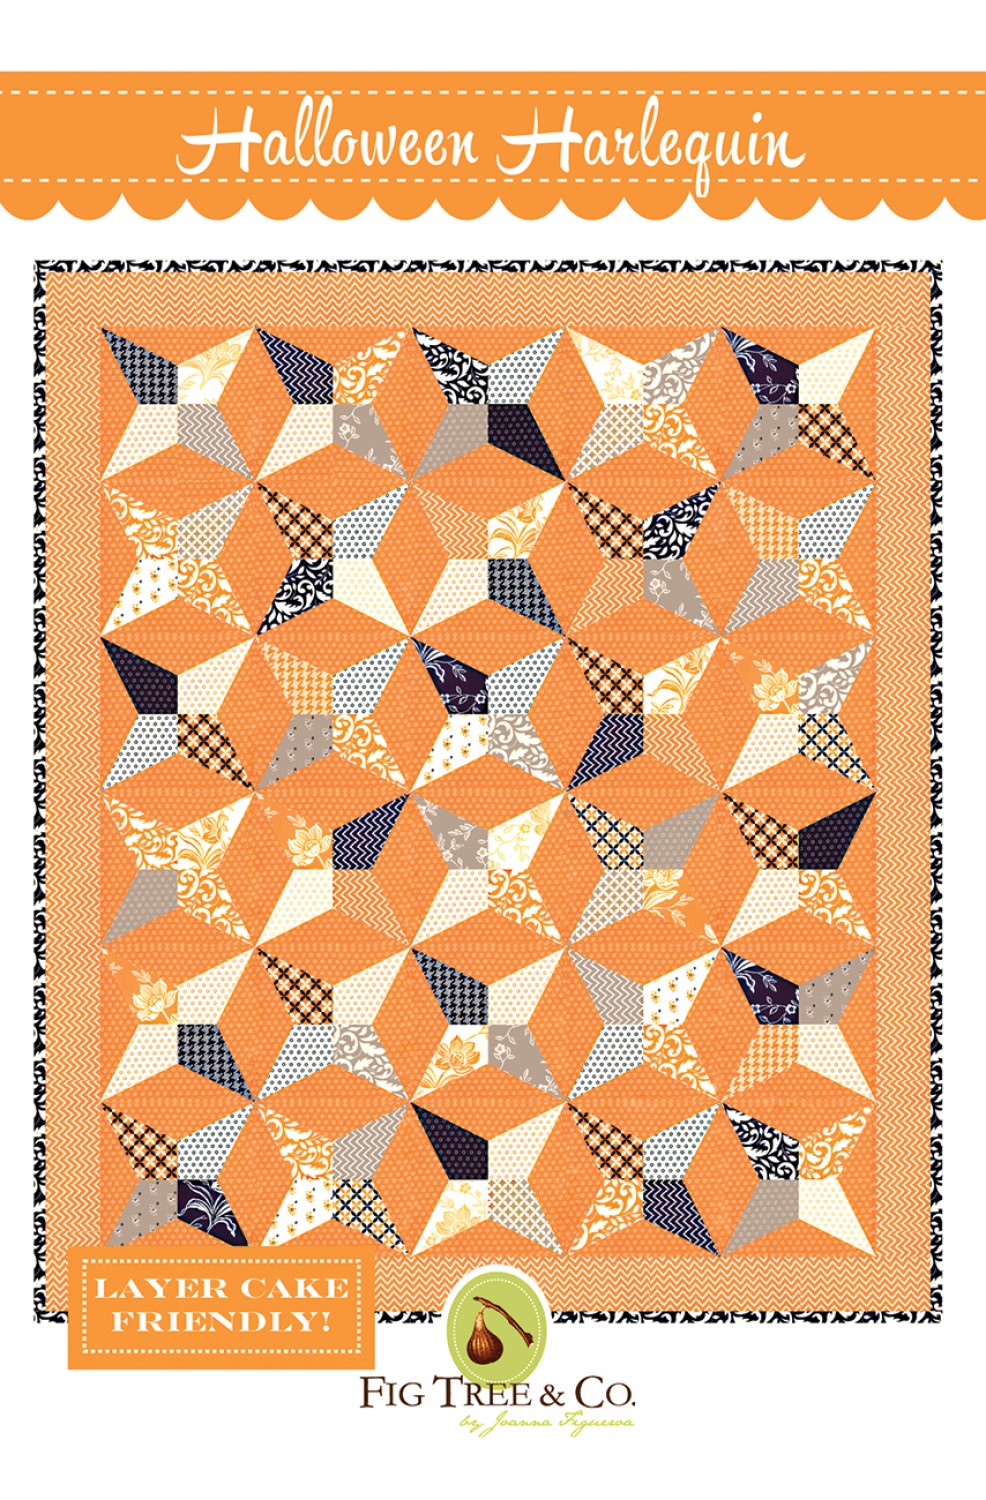 Halloween Harlequin by Fig Tree & Co